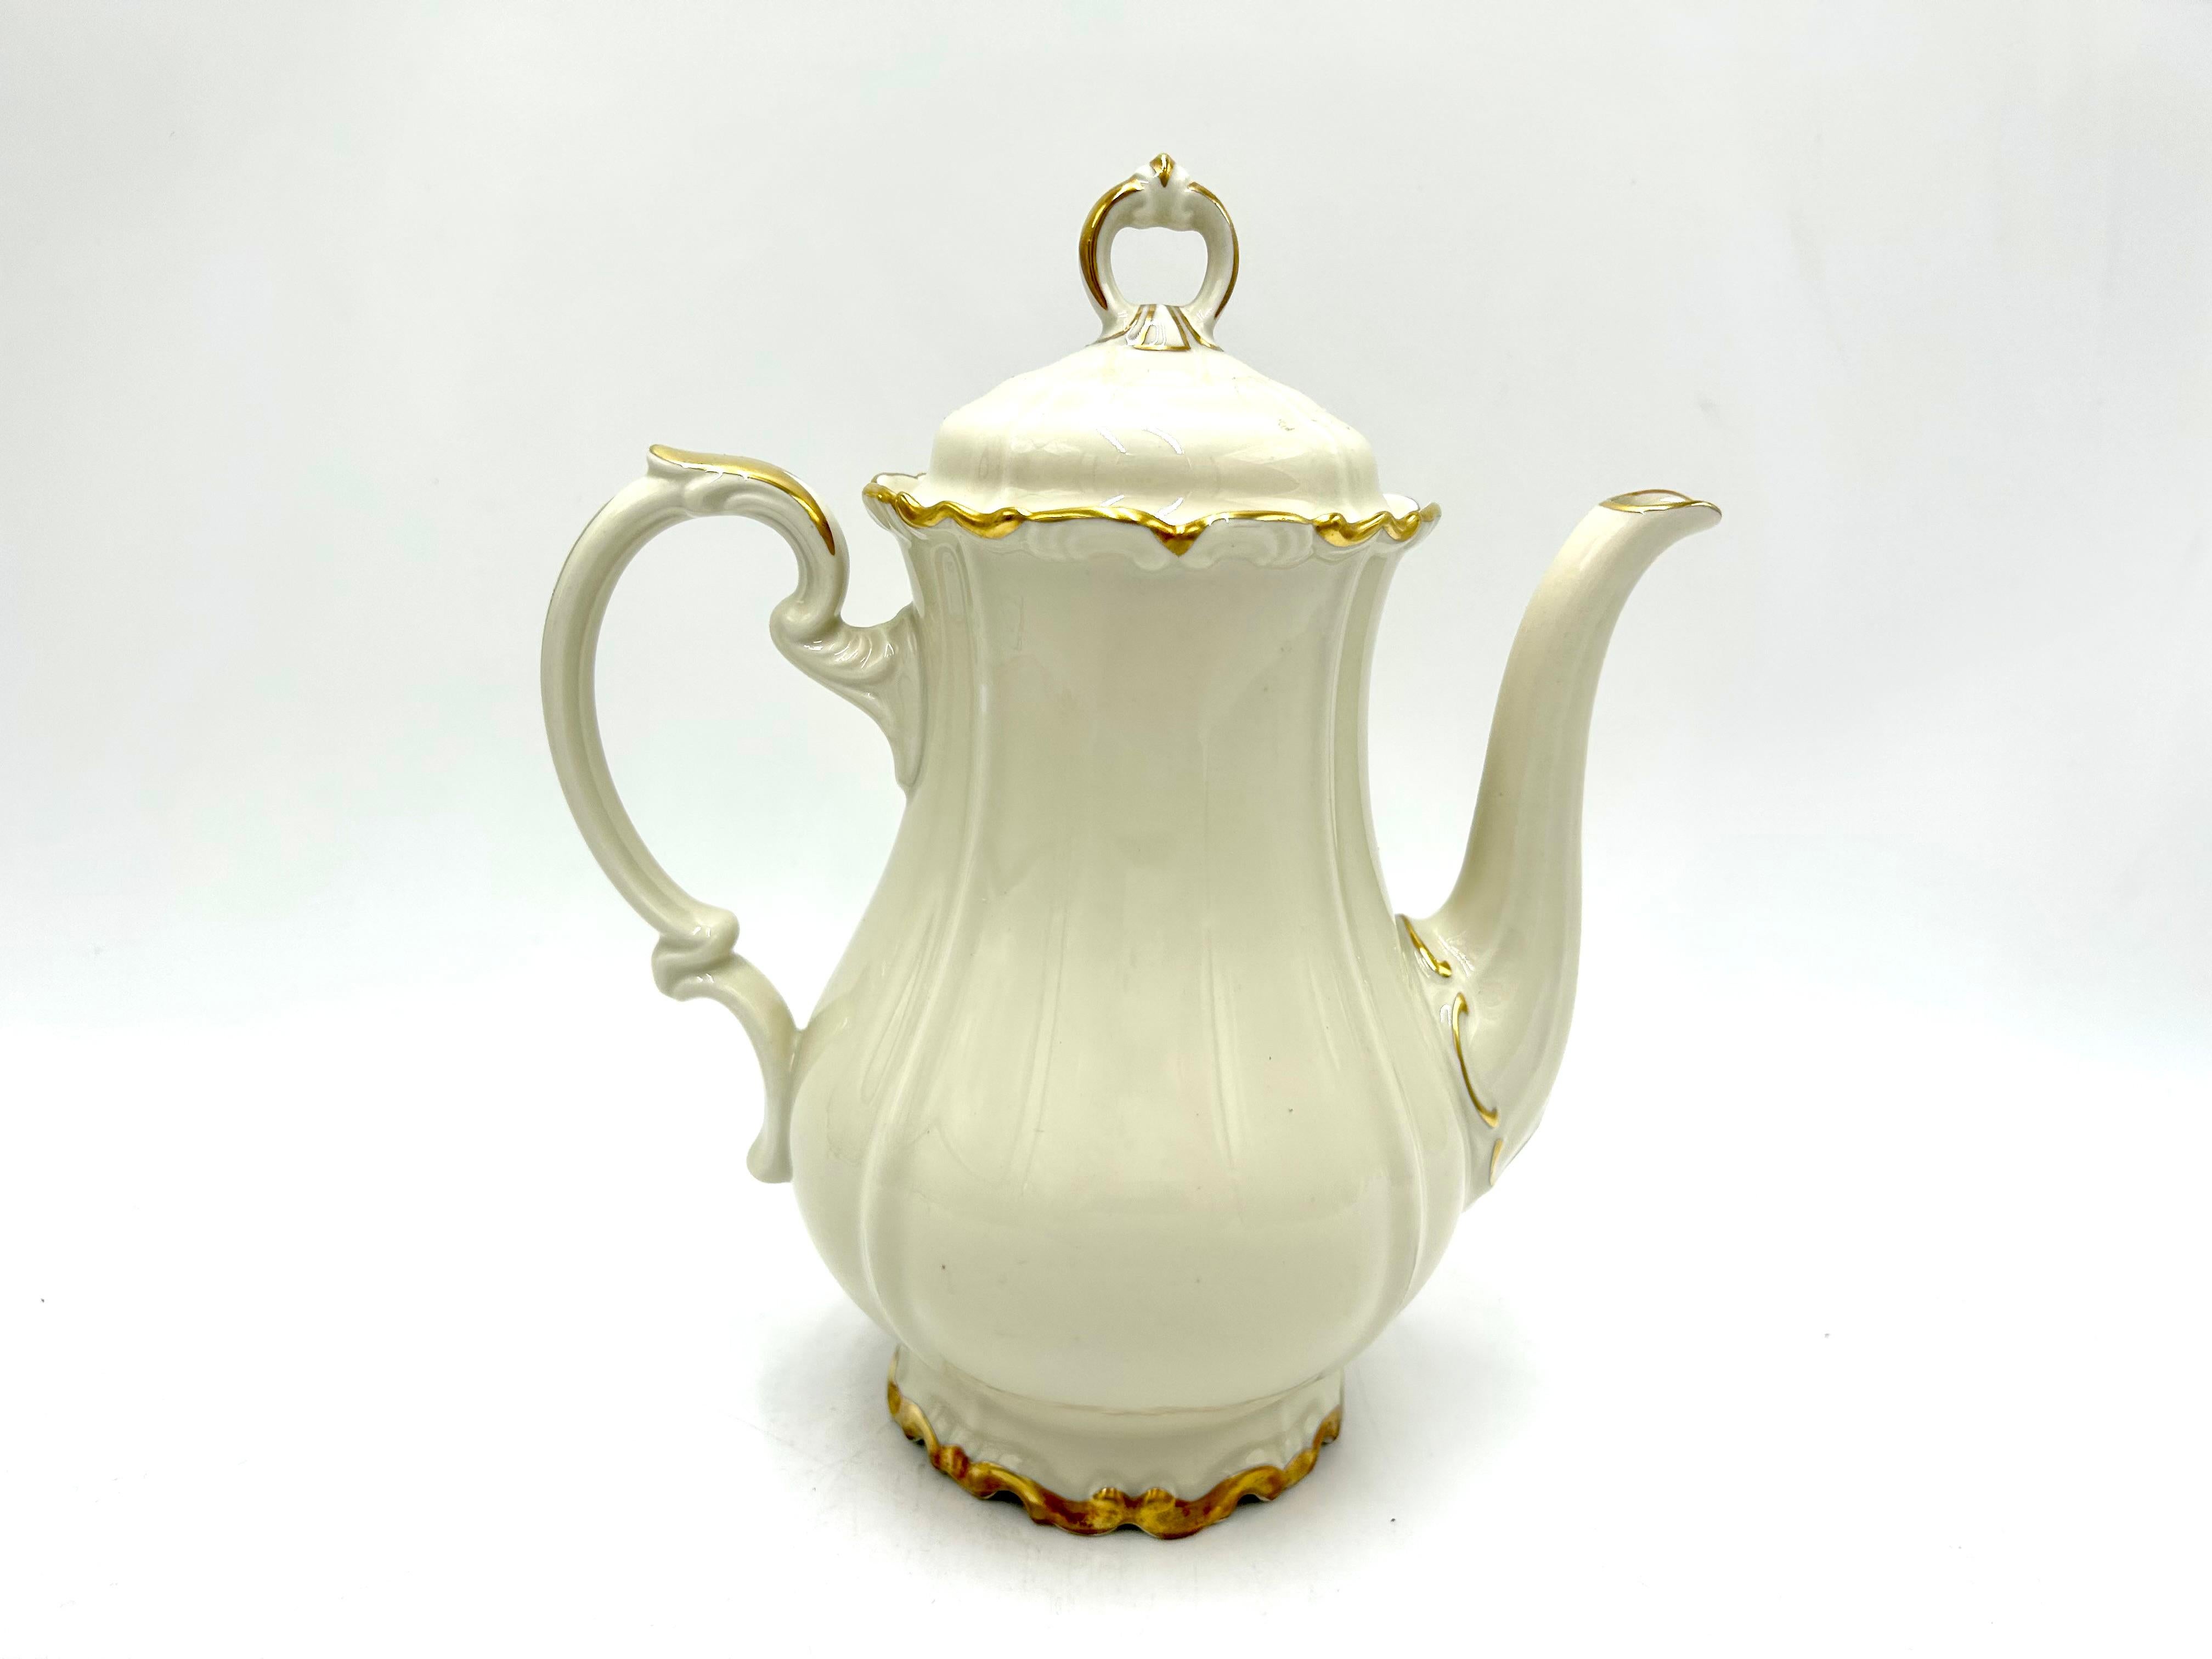 Classic and elegant coffee pot in ivory color decorated with gilding on the edges.

Made in Germany by Edelstein Bavaria, a product from the Maria Theresa series.

Very good condition, no damage

Height 22.5 cm width 20.5 cm depth 10.5 cm.